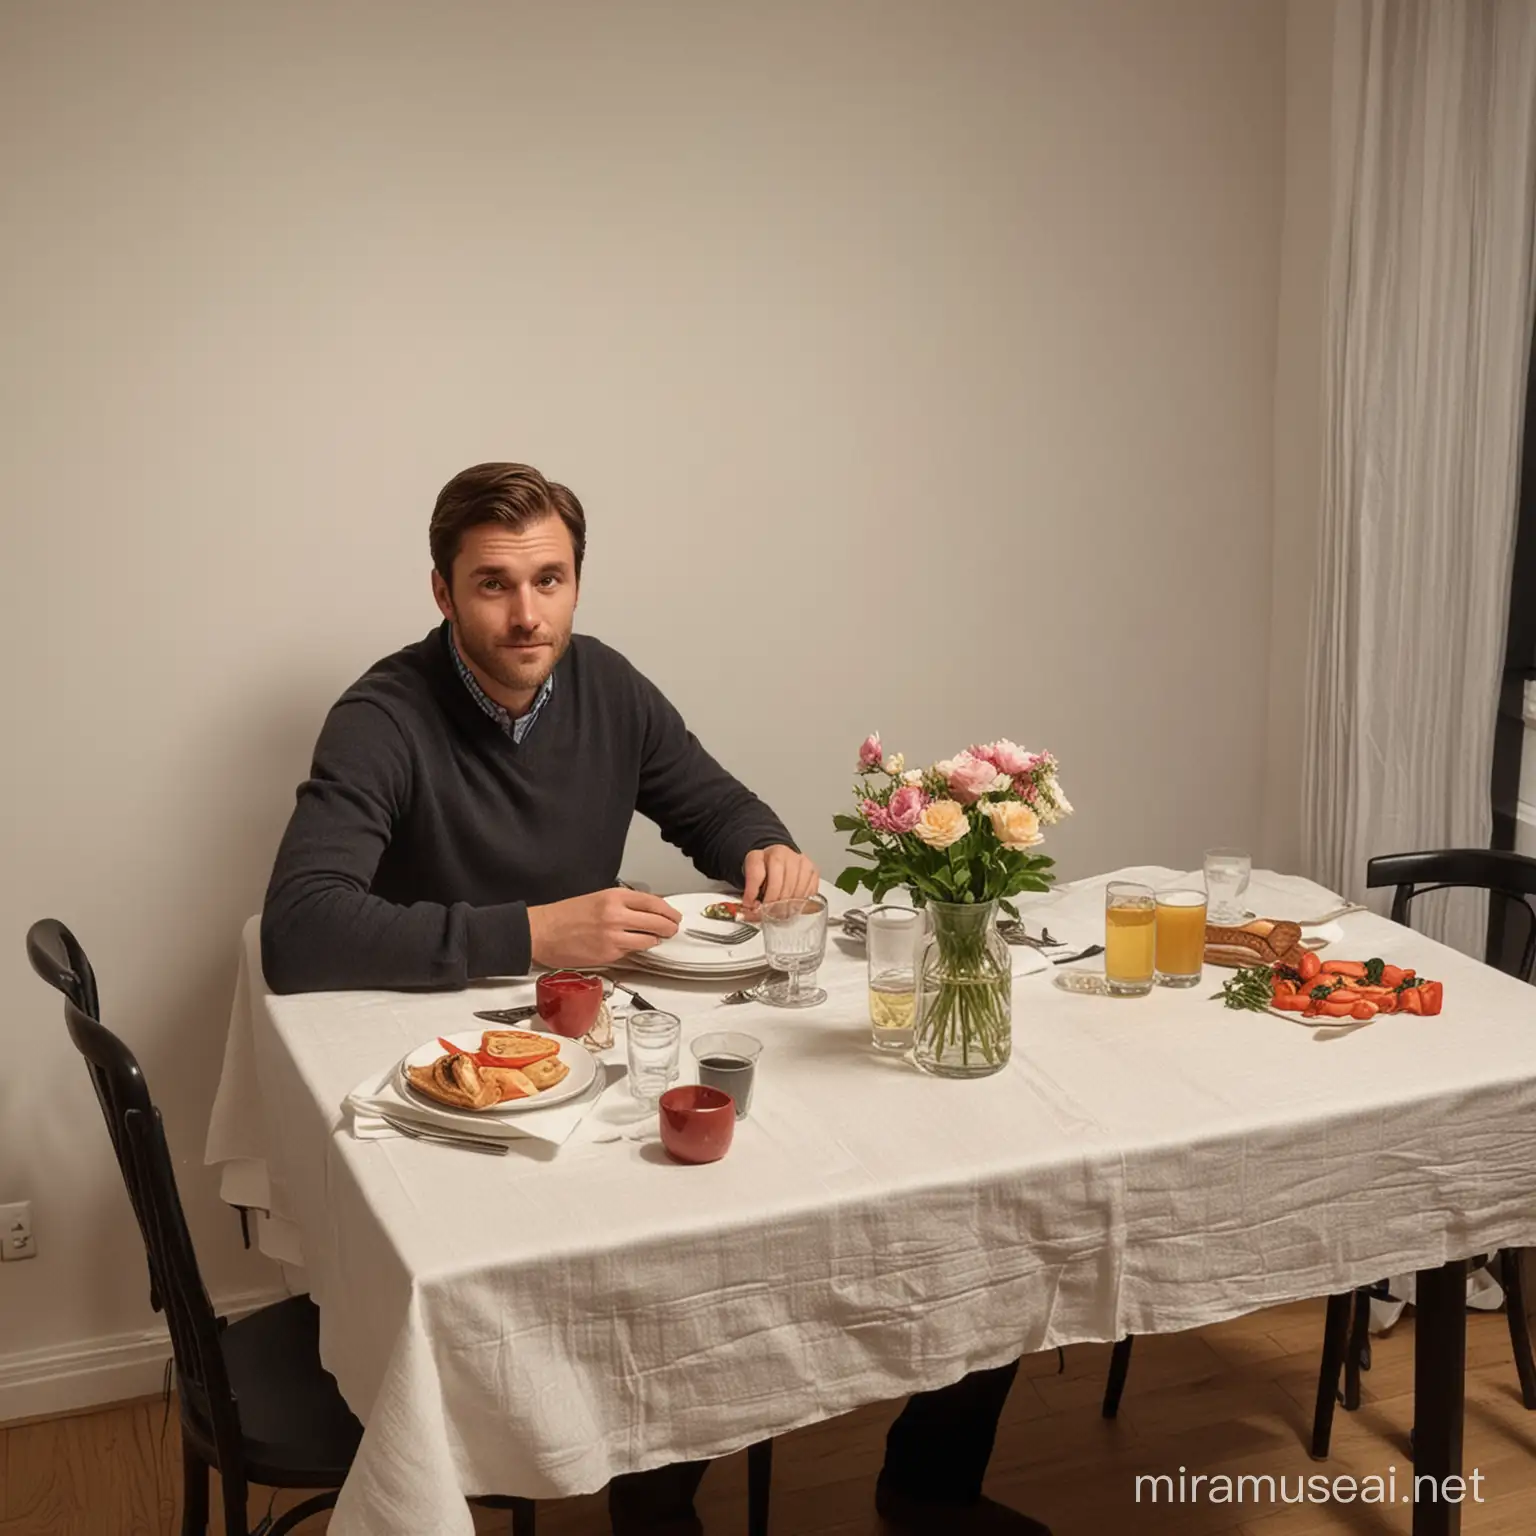 Intimate New Years Eve Celebration in Copenhagen Apartment with Floral Table Setting